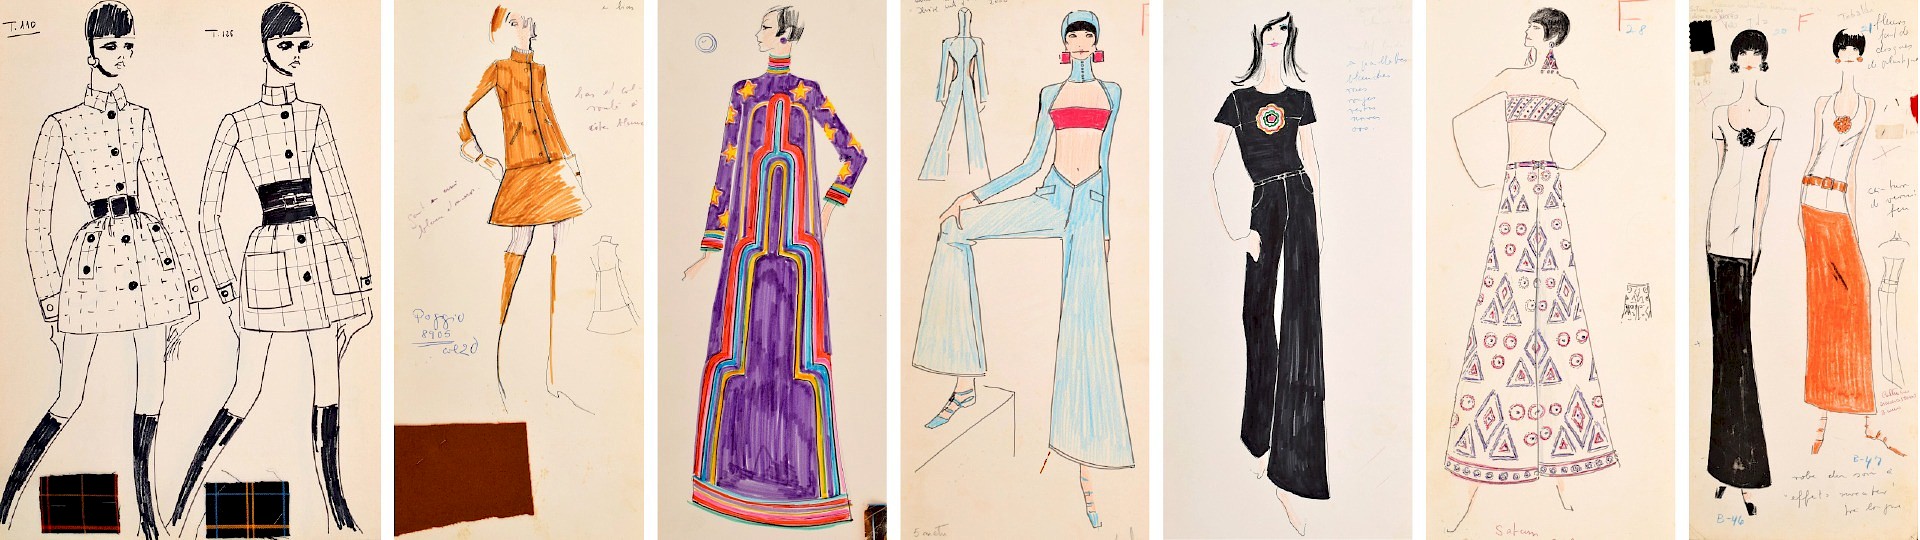 Rare Karl Lagerfeld Fashion Drawings by Palm Beach Modern Auctions